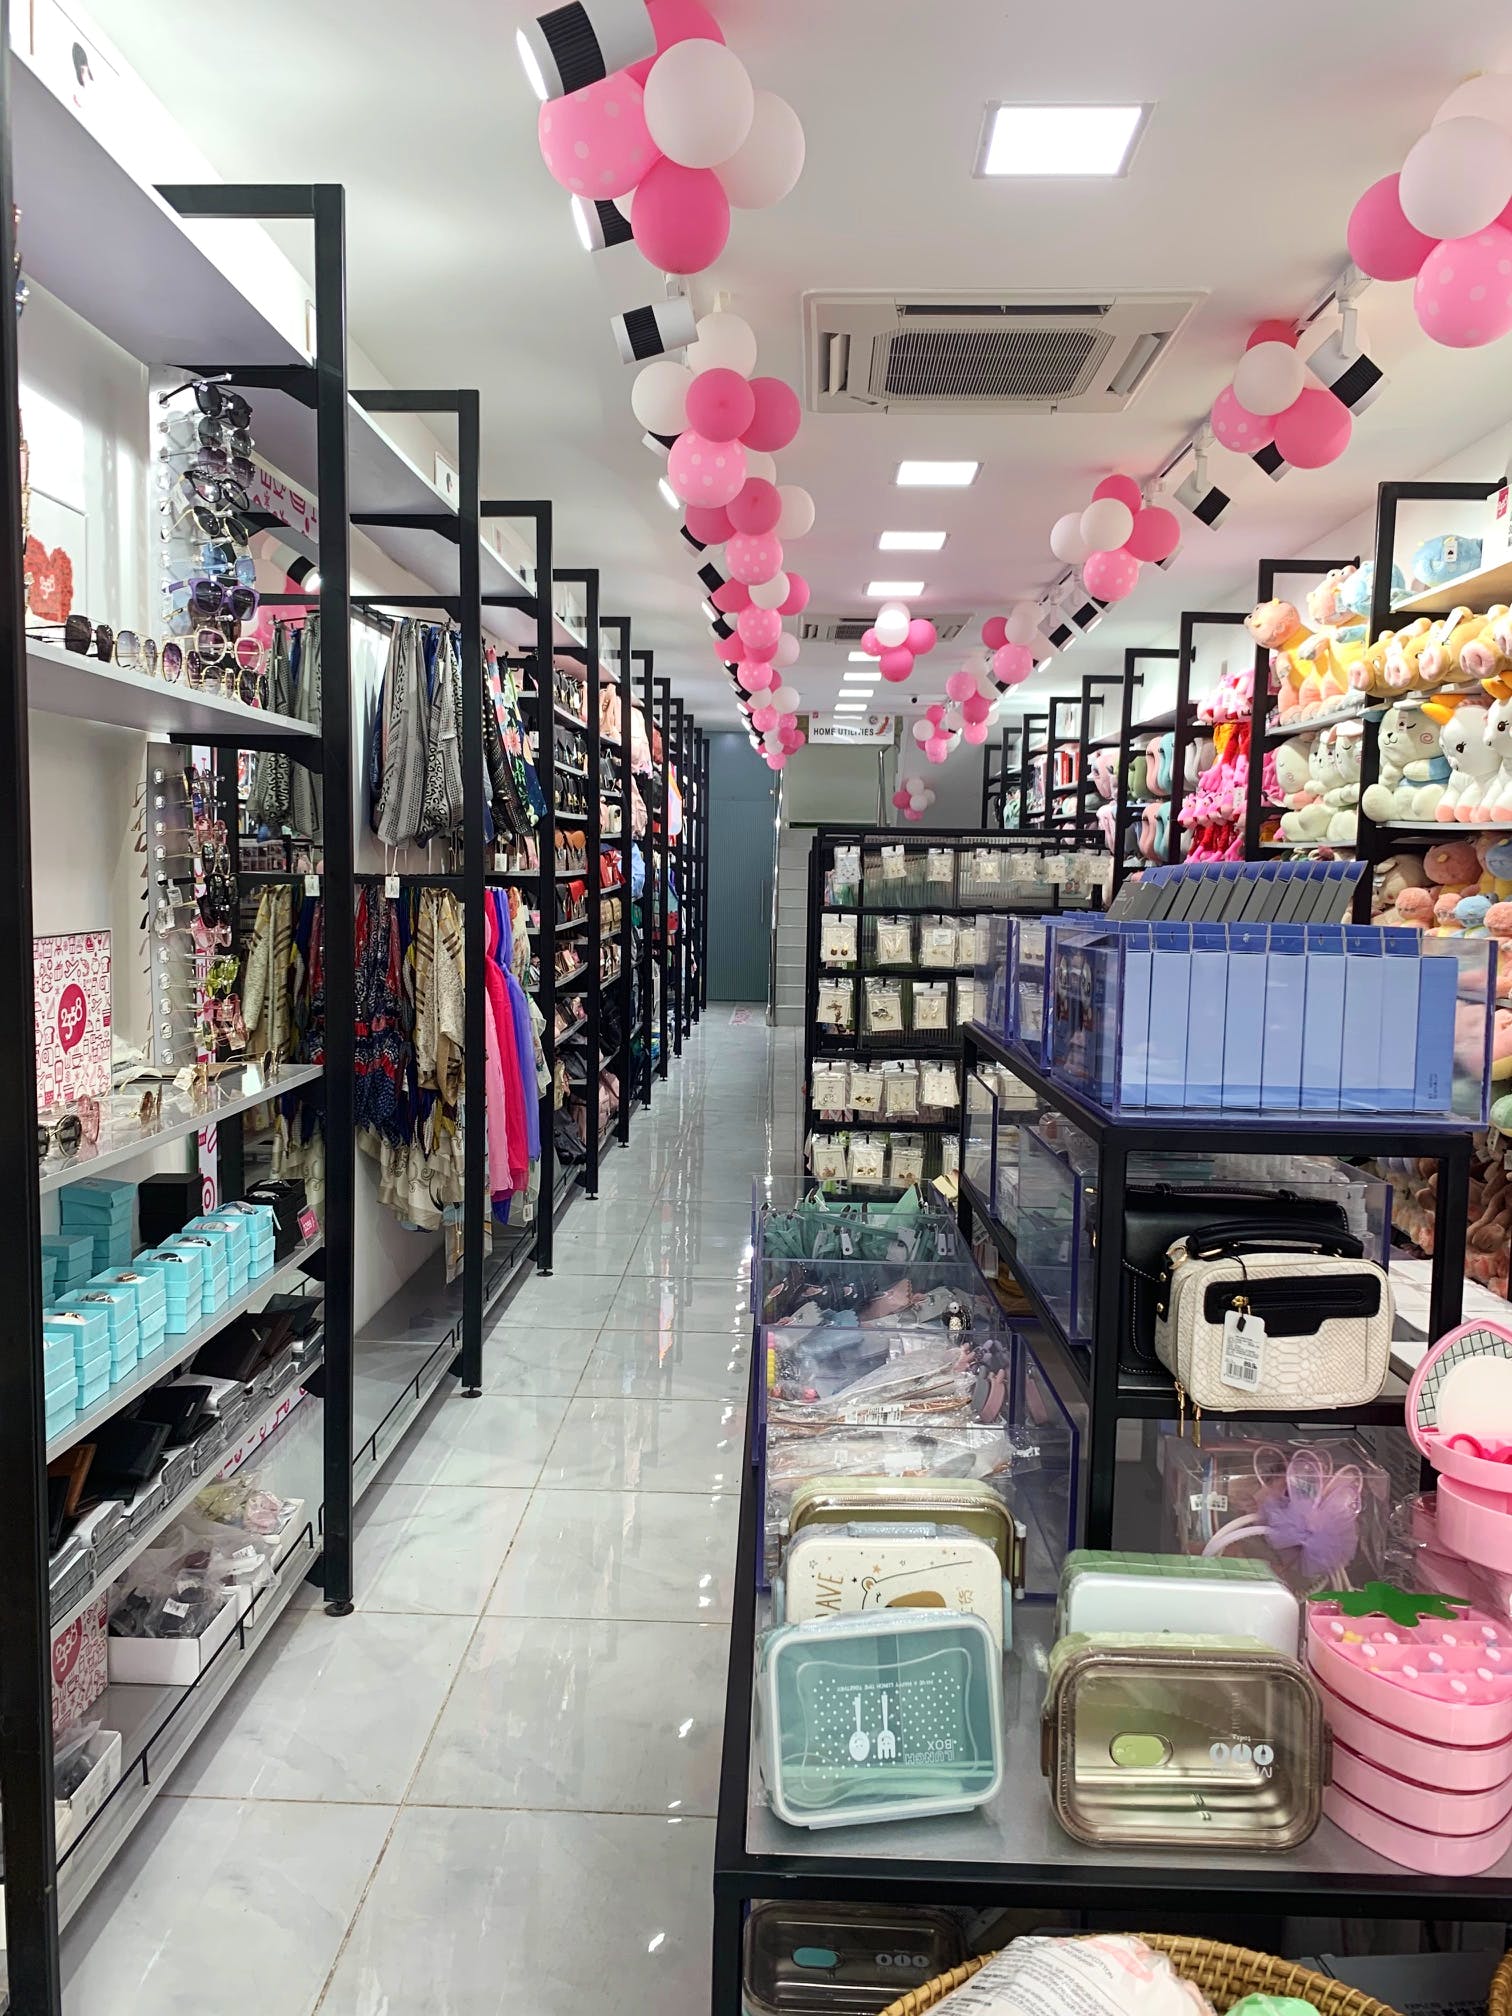 Pink,Building,Outlet store,Aisle,Interior design,Retail,Room,Boutique,Supermarket,Grocery store